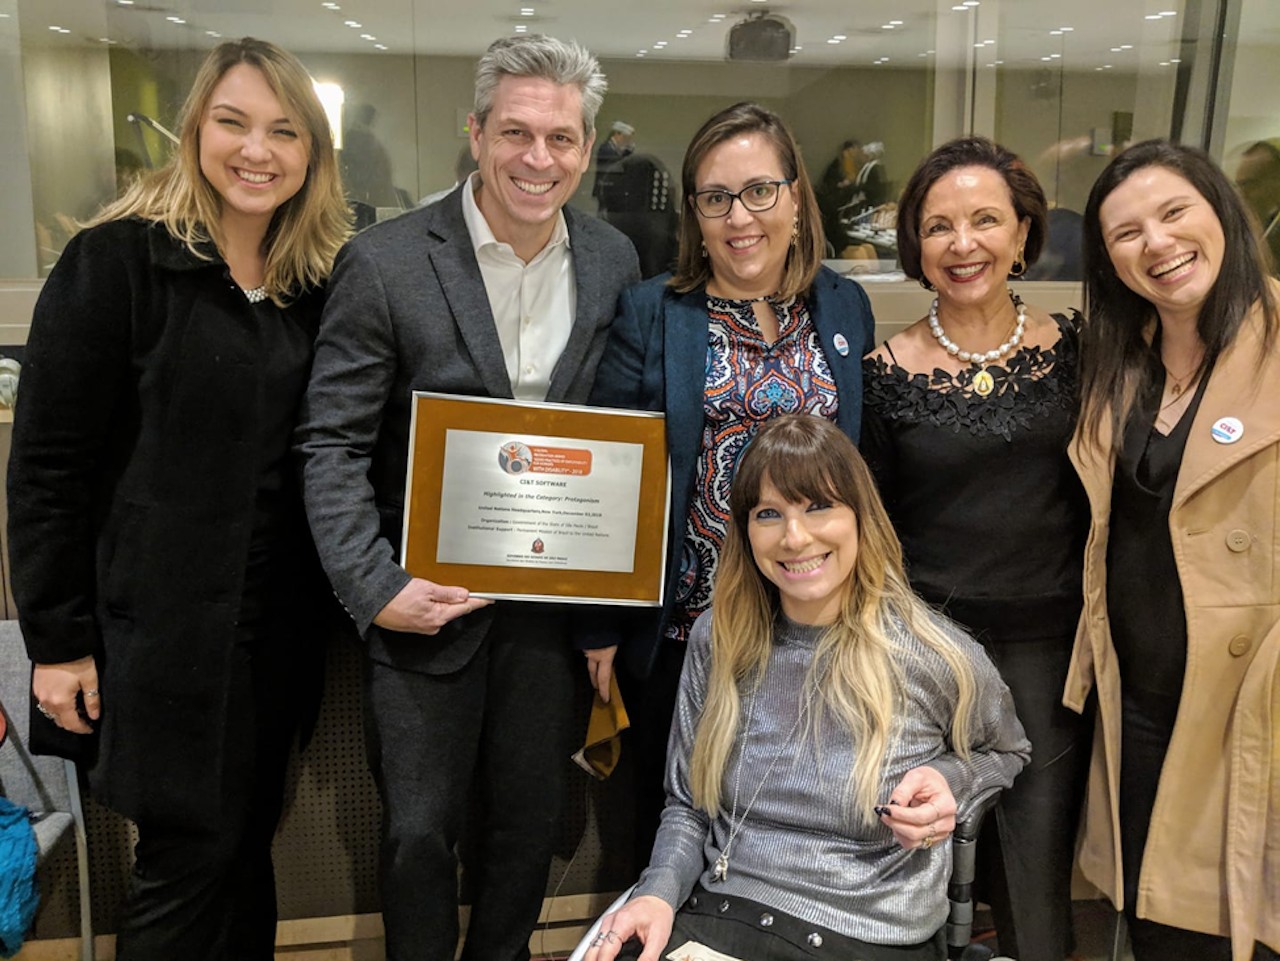 CI&T employees smiling including CI&T President Bruno Guicardi holding an award from the United Nations